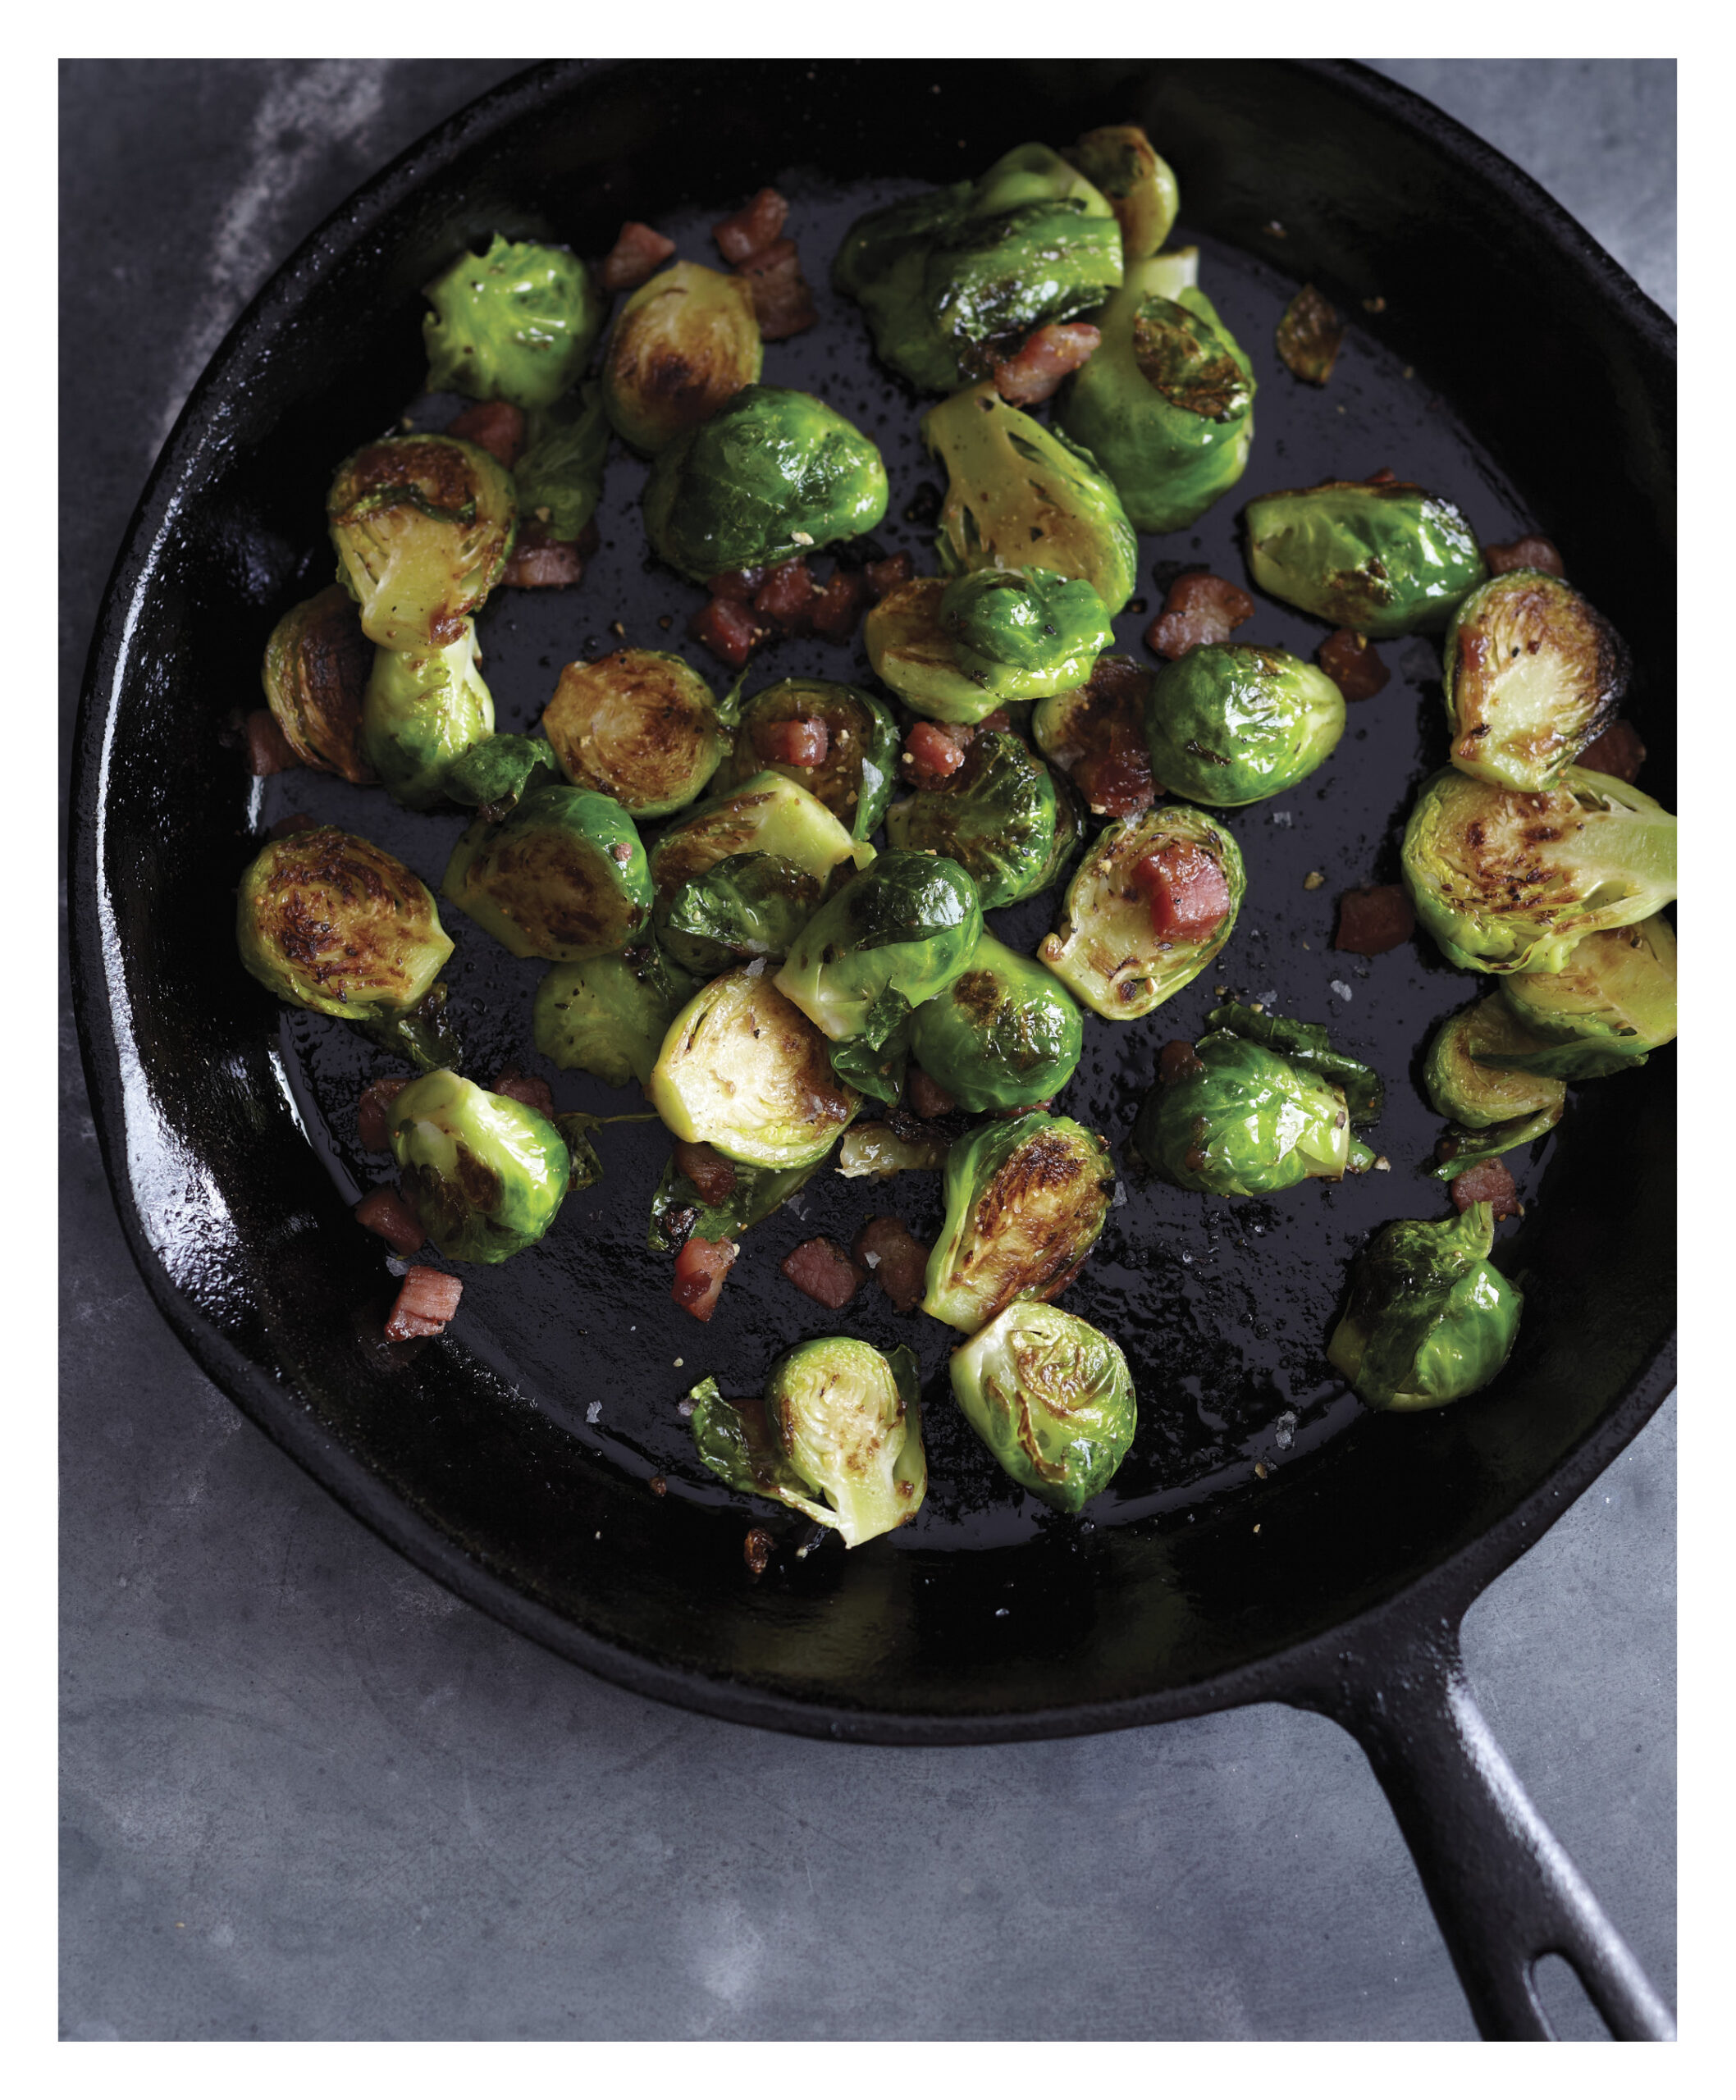 Charred Brussels Sprouts, from Brassicas